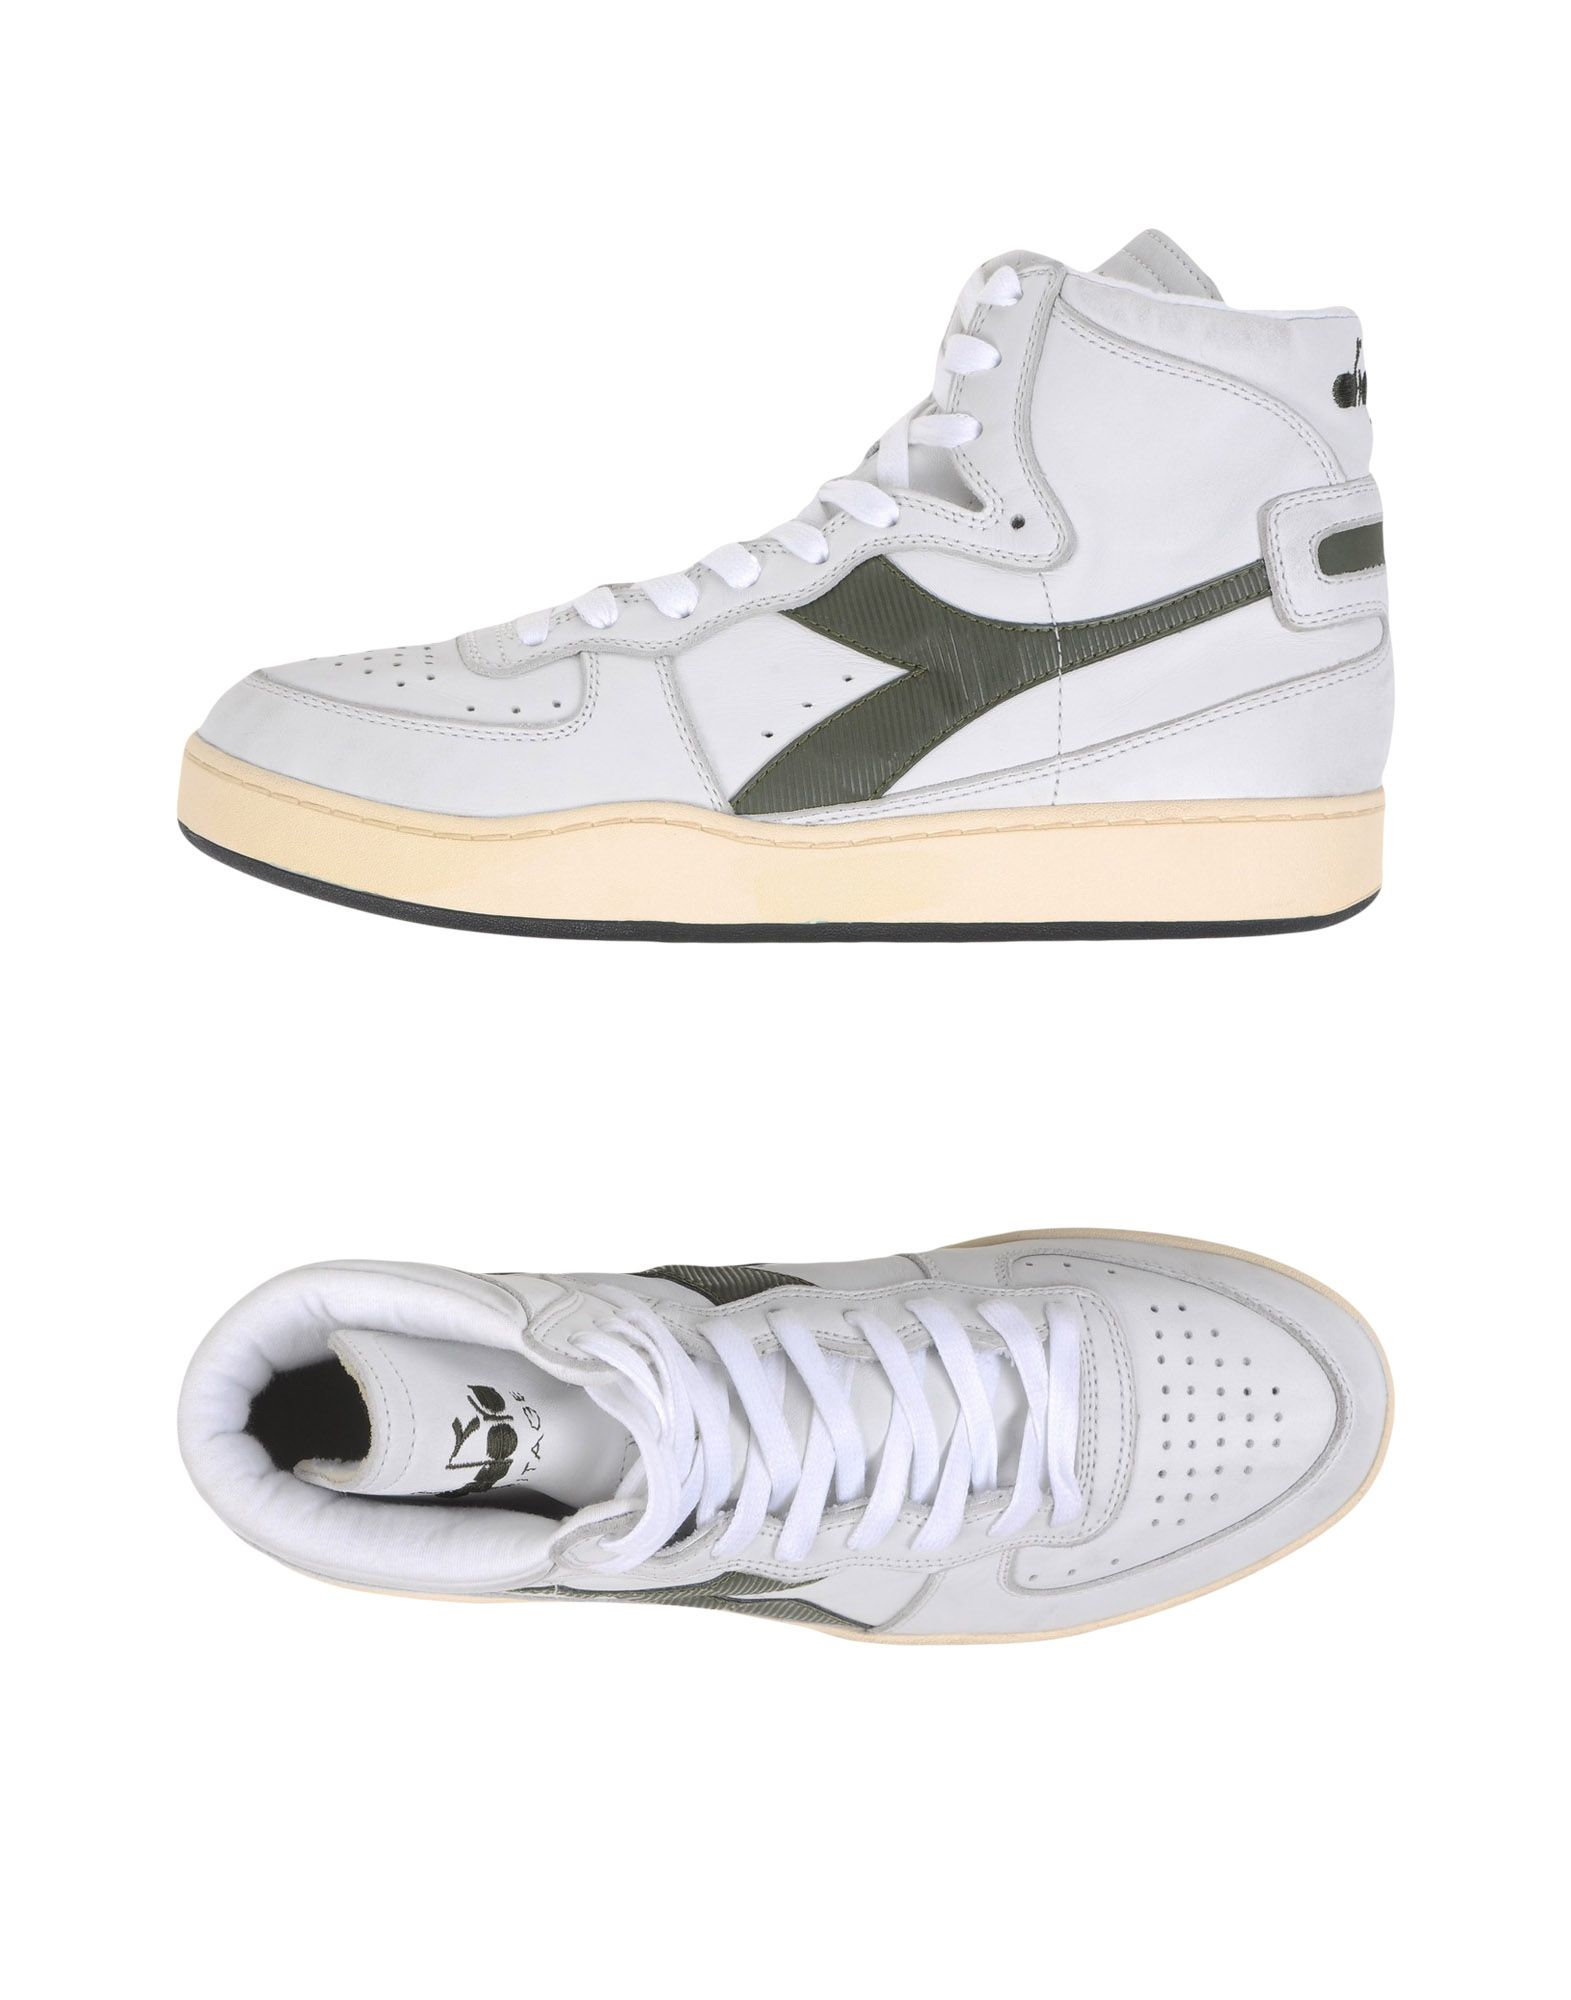 Lyst - Diadora High-tops & Sneakers in White for Men